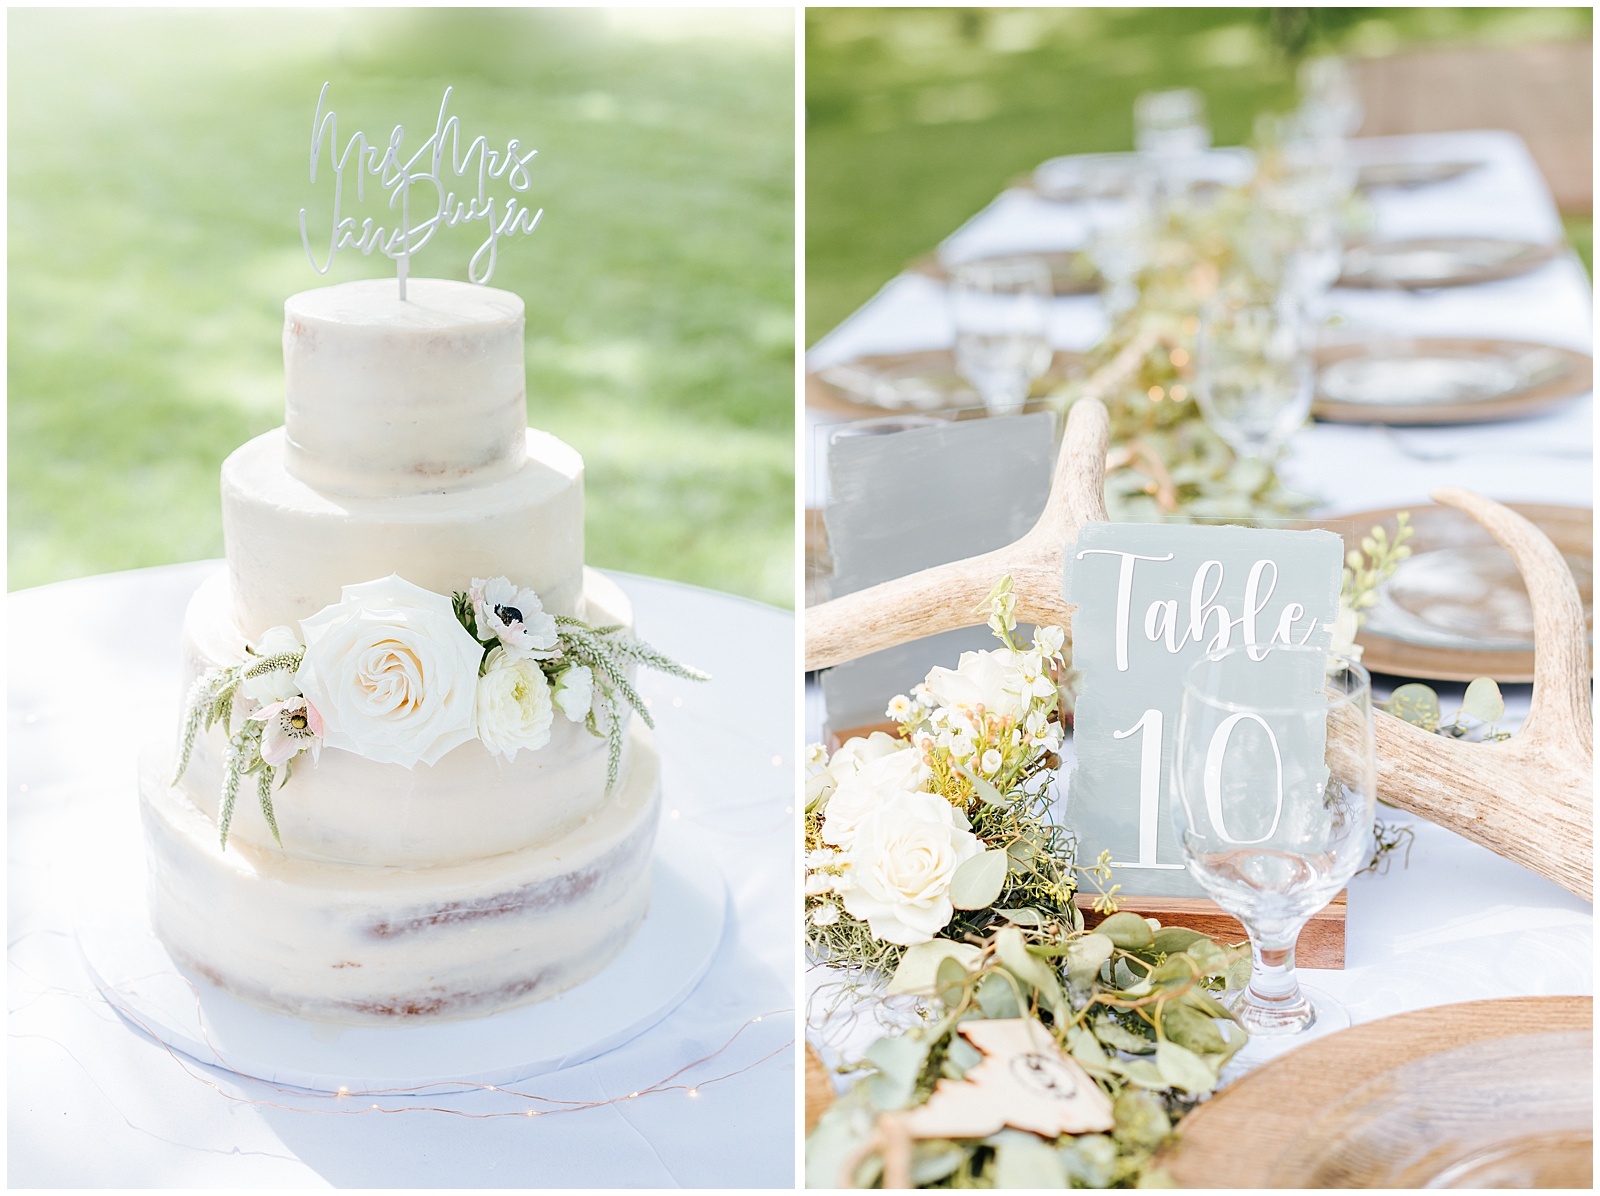 Tiered Naked Wedding Cake and Tablescape at White Willow Estate Wedding